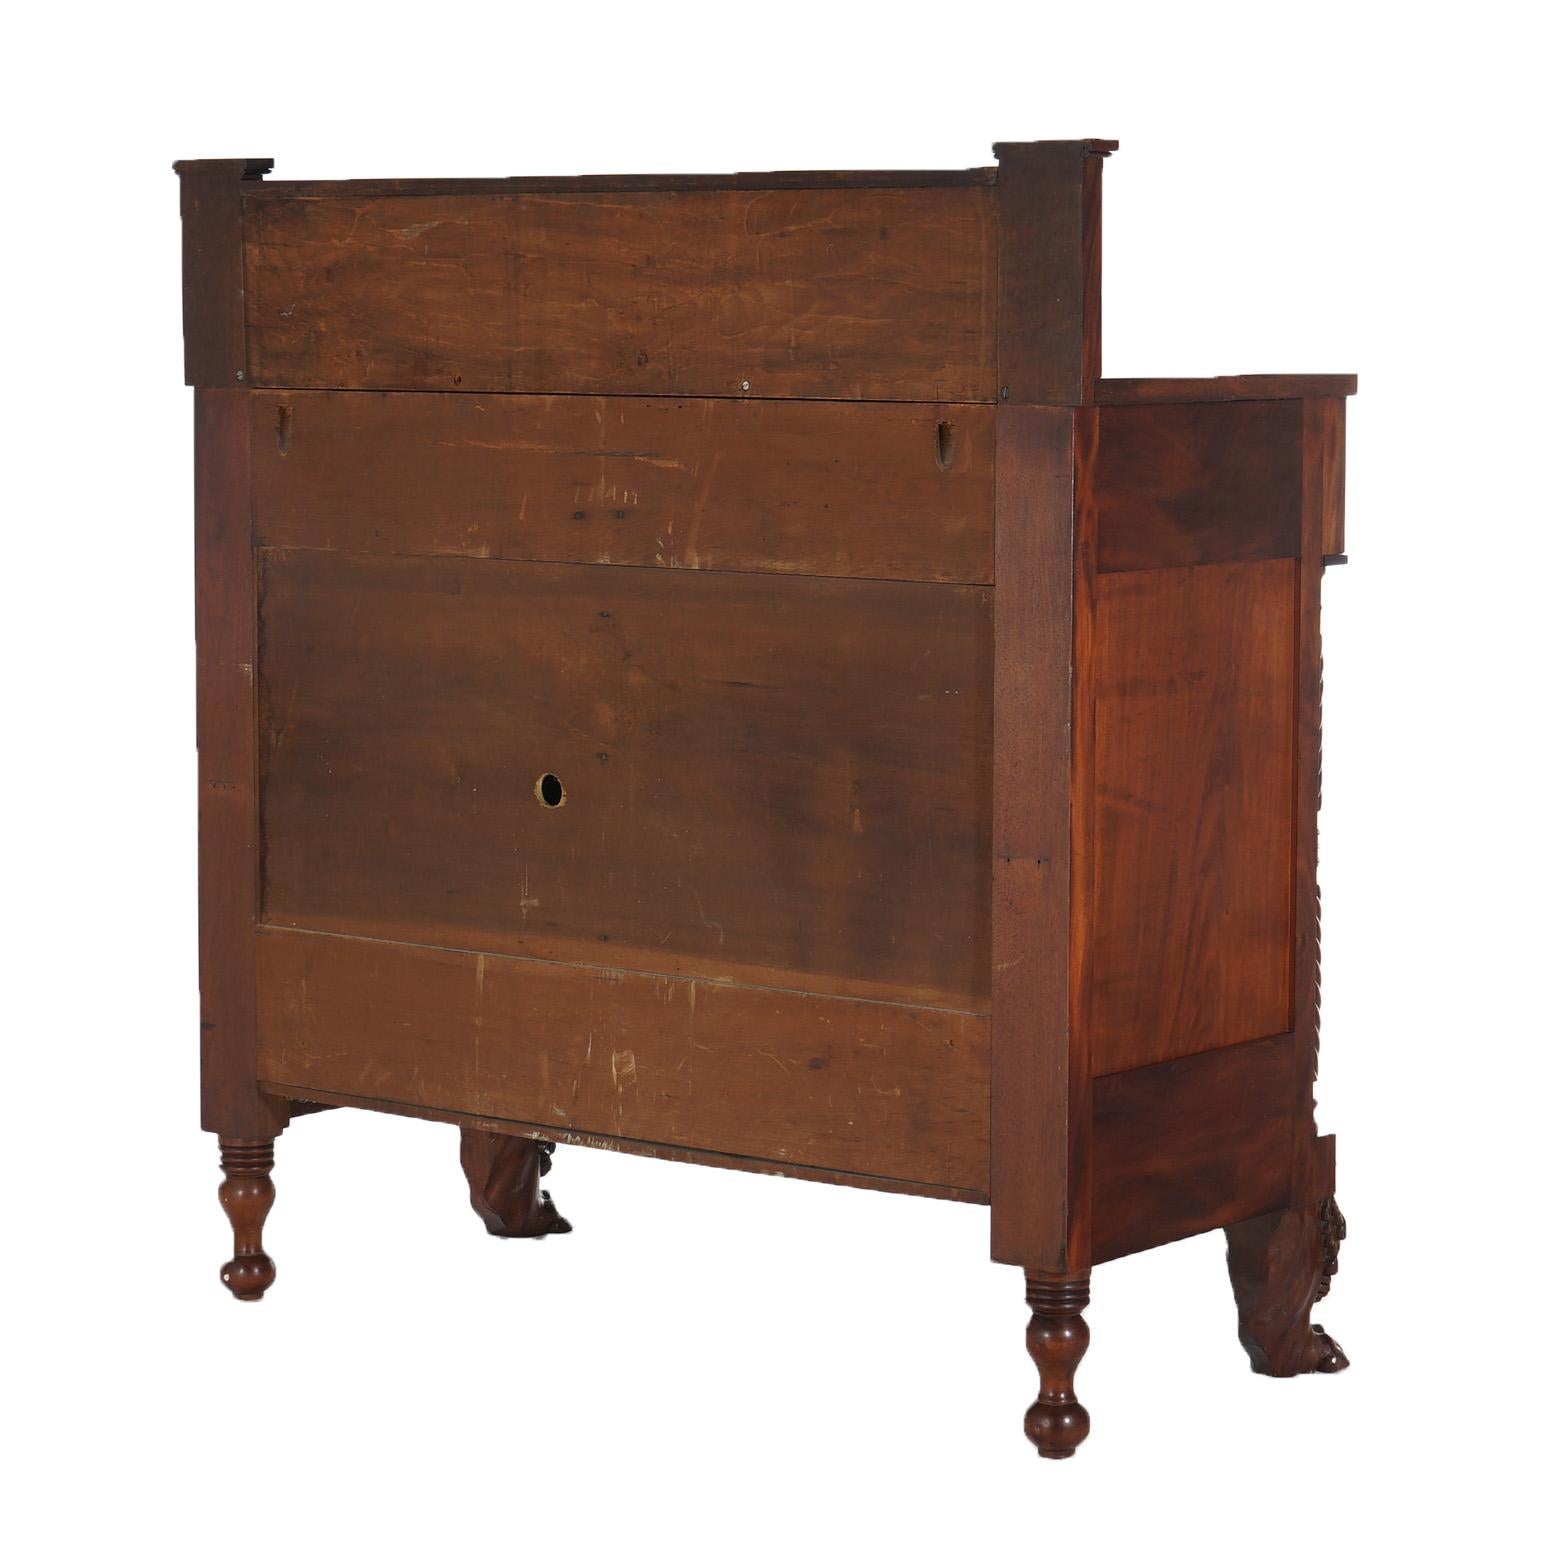 Antique American Empire Flame Mahogany Marble Top Linen Press Sideboard C1840 For Sale 10